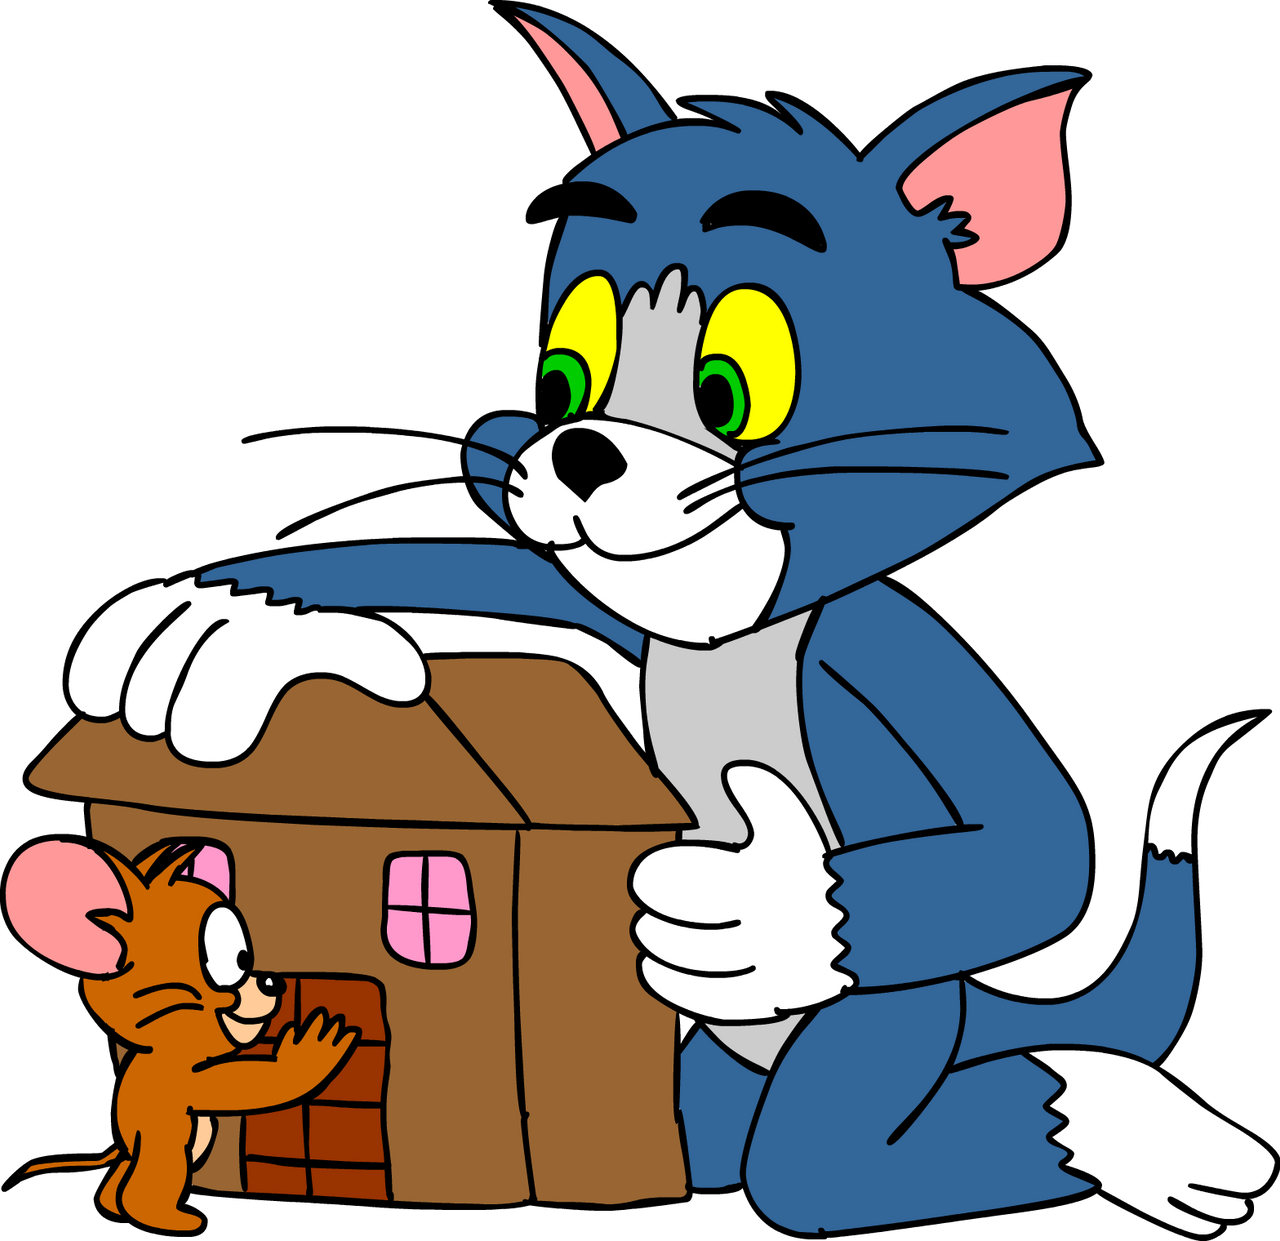 Tom and Jerry making a gingerbread house by Blackrhinoranger on DeviantArt